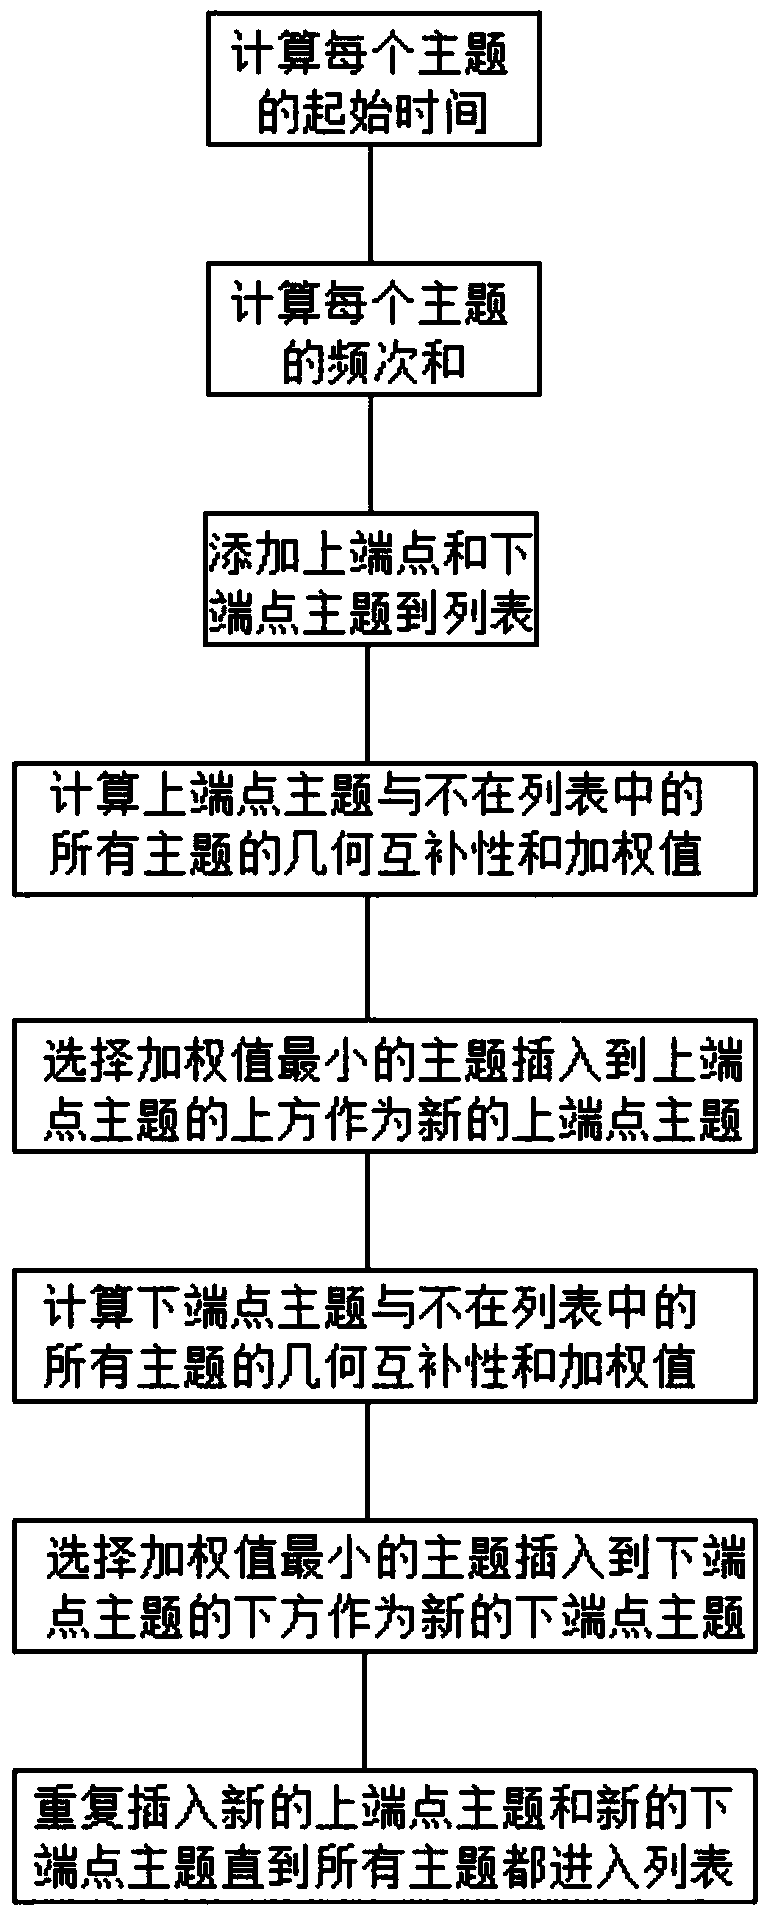 A Topic Visualization Method for Chinese Document Collection